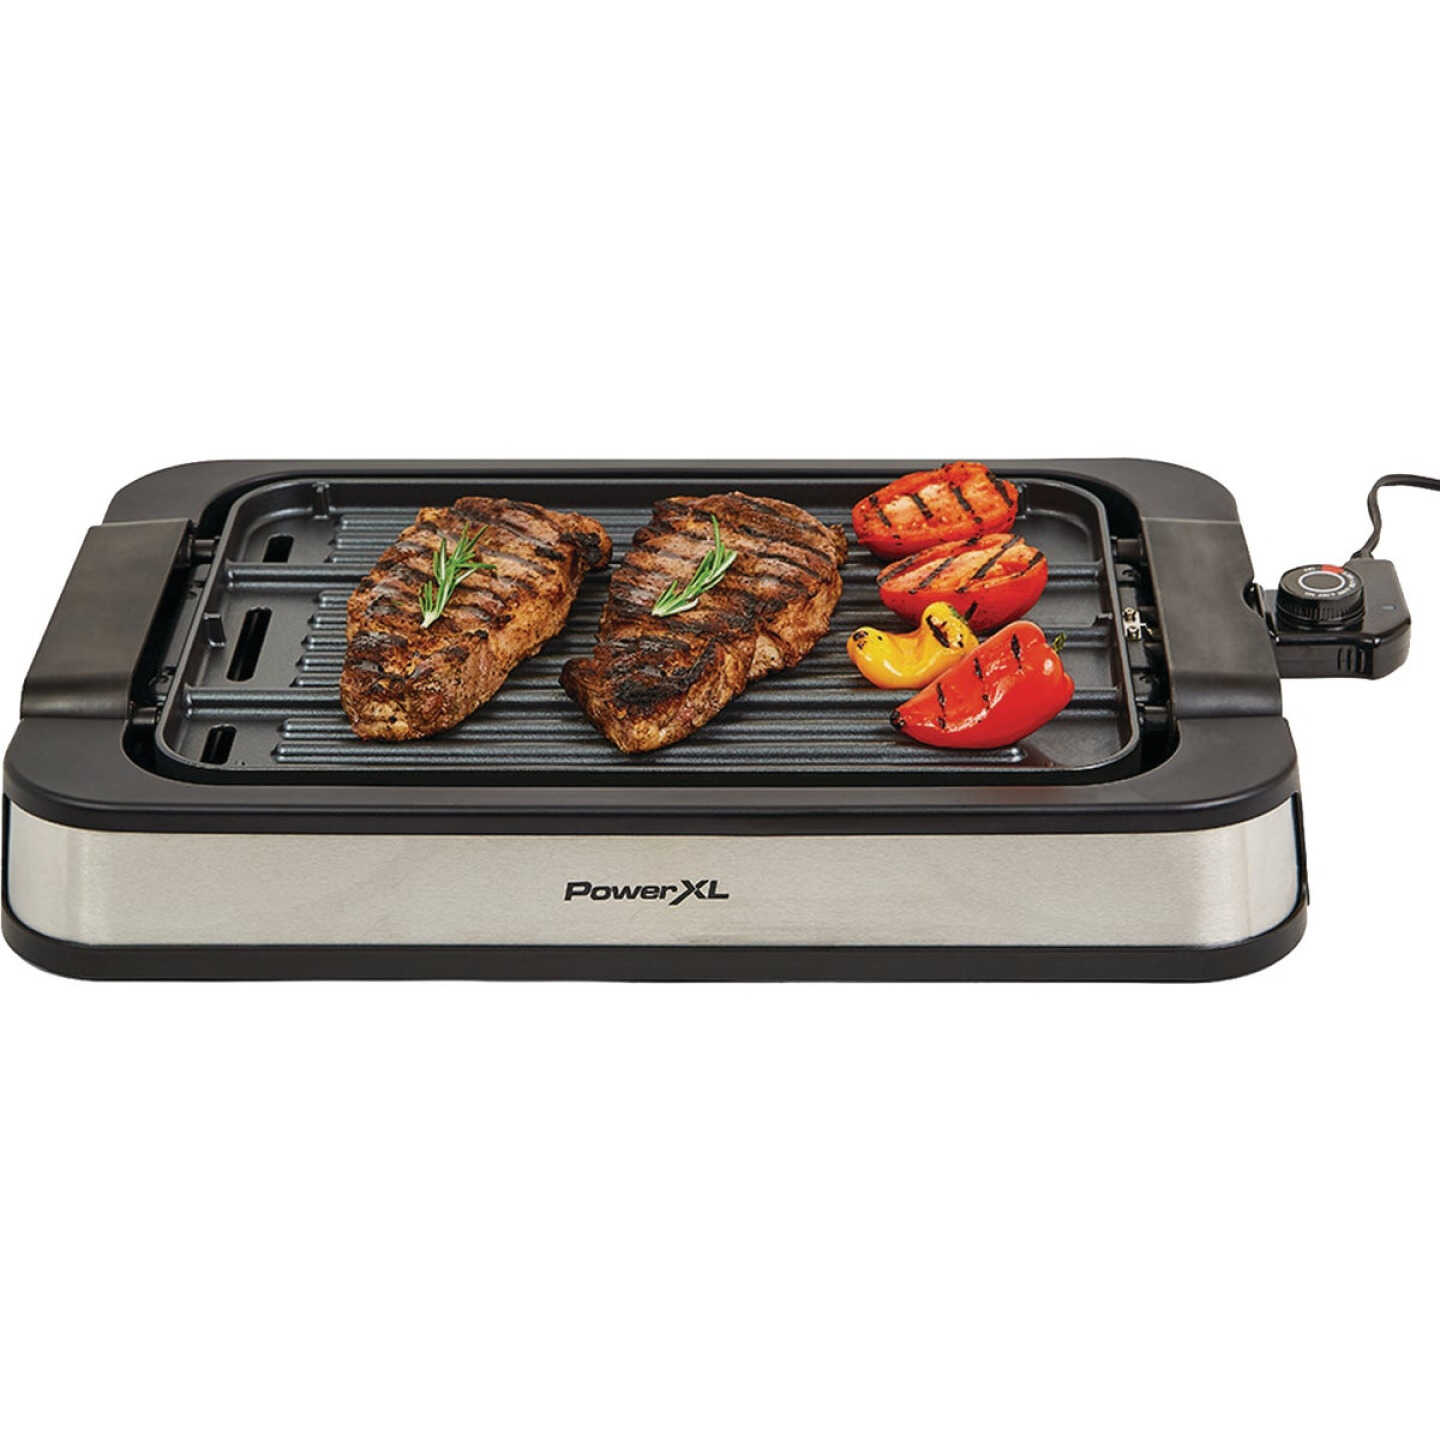 PowerXL Indoor Grill/Griddle - Stanford Home Centers